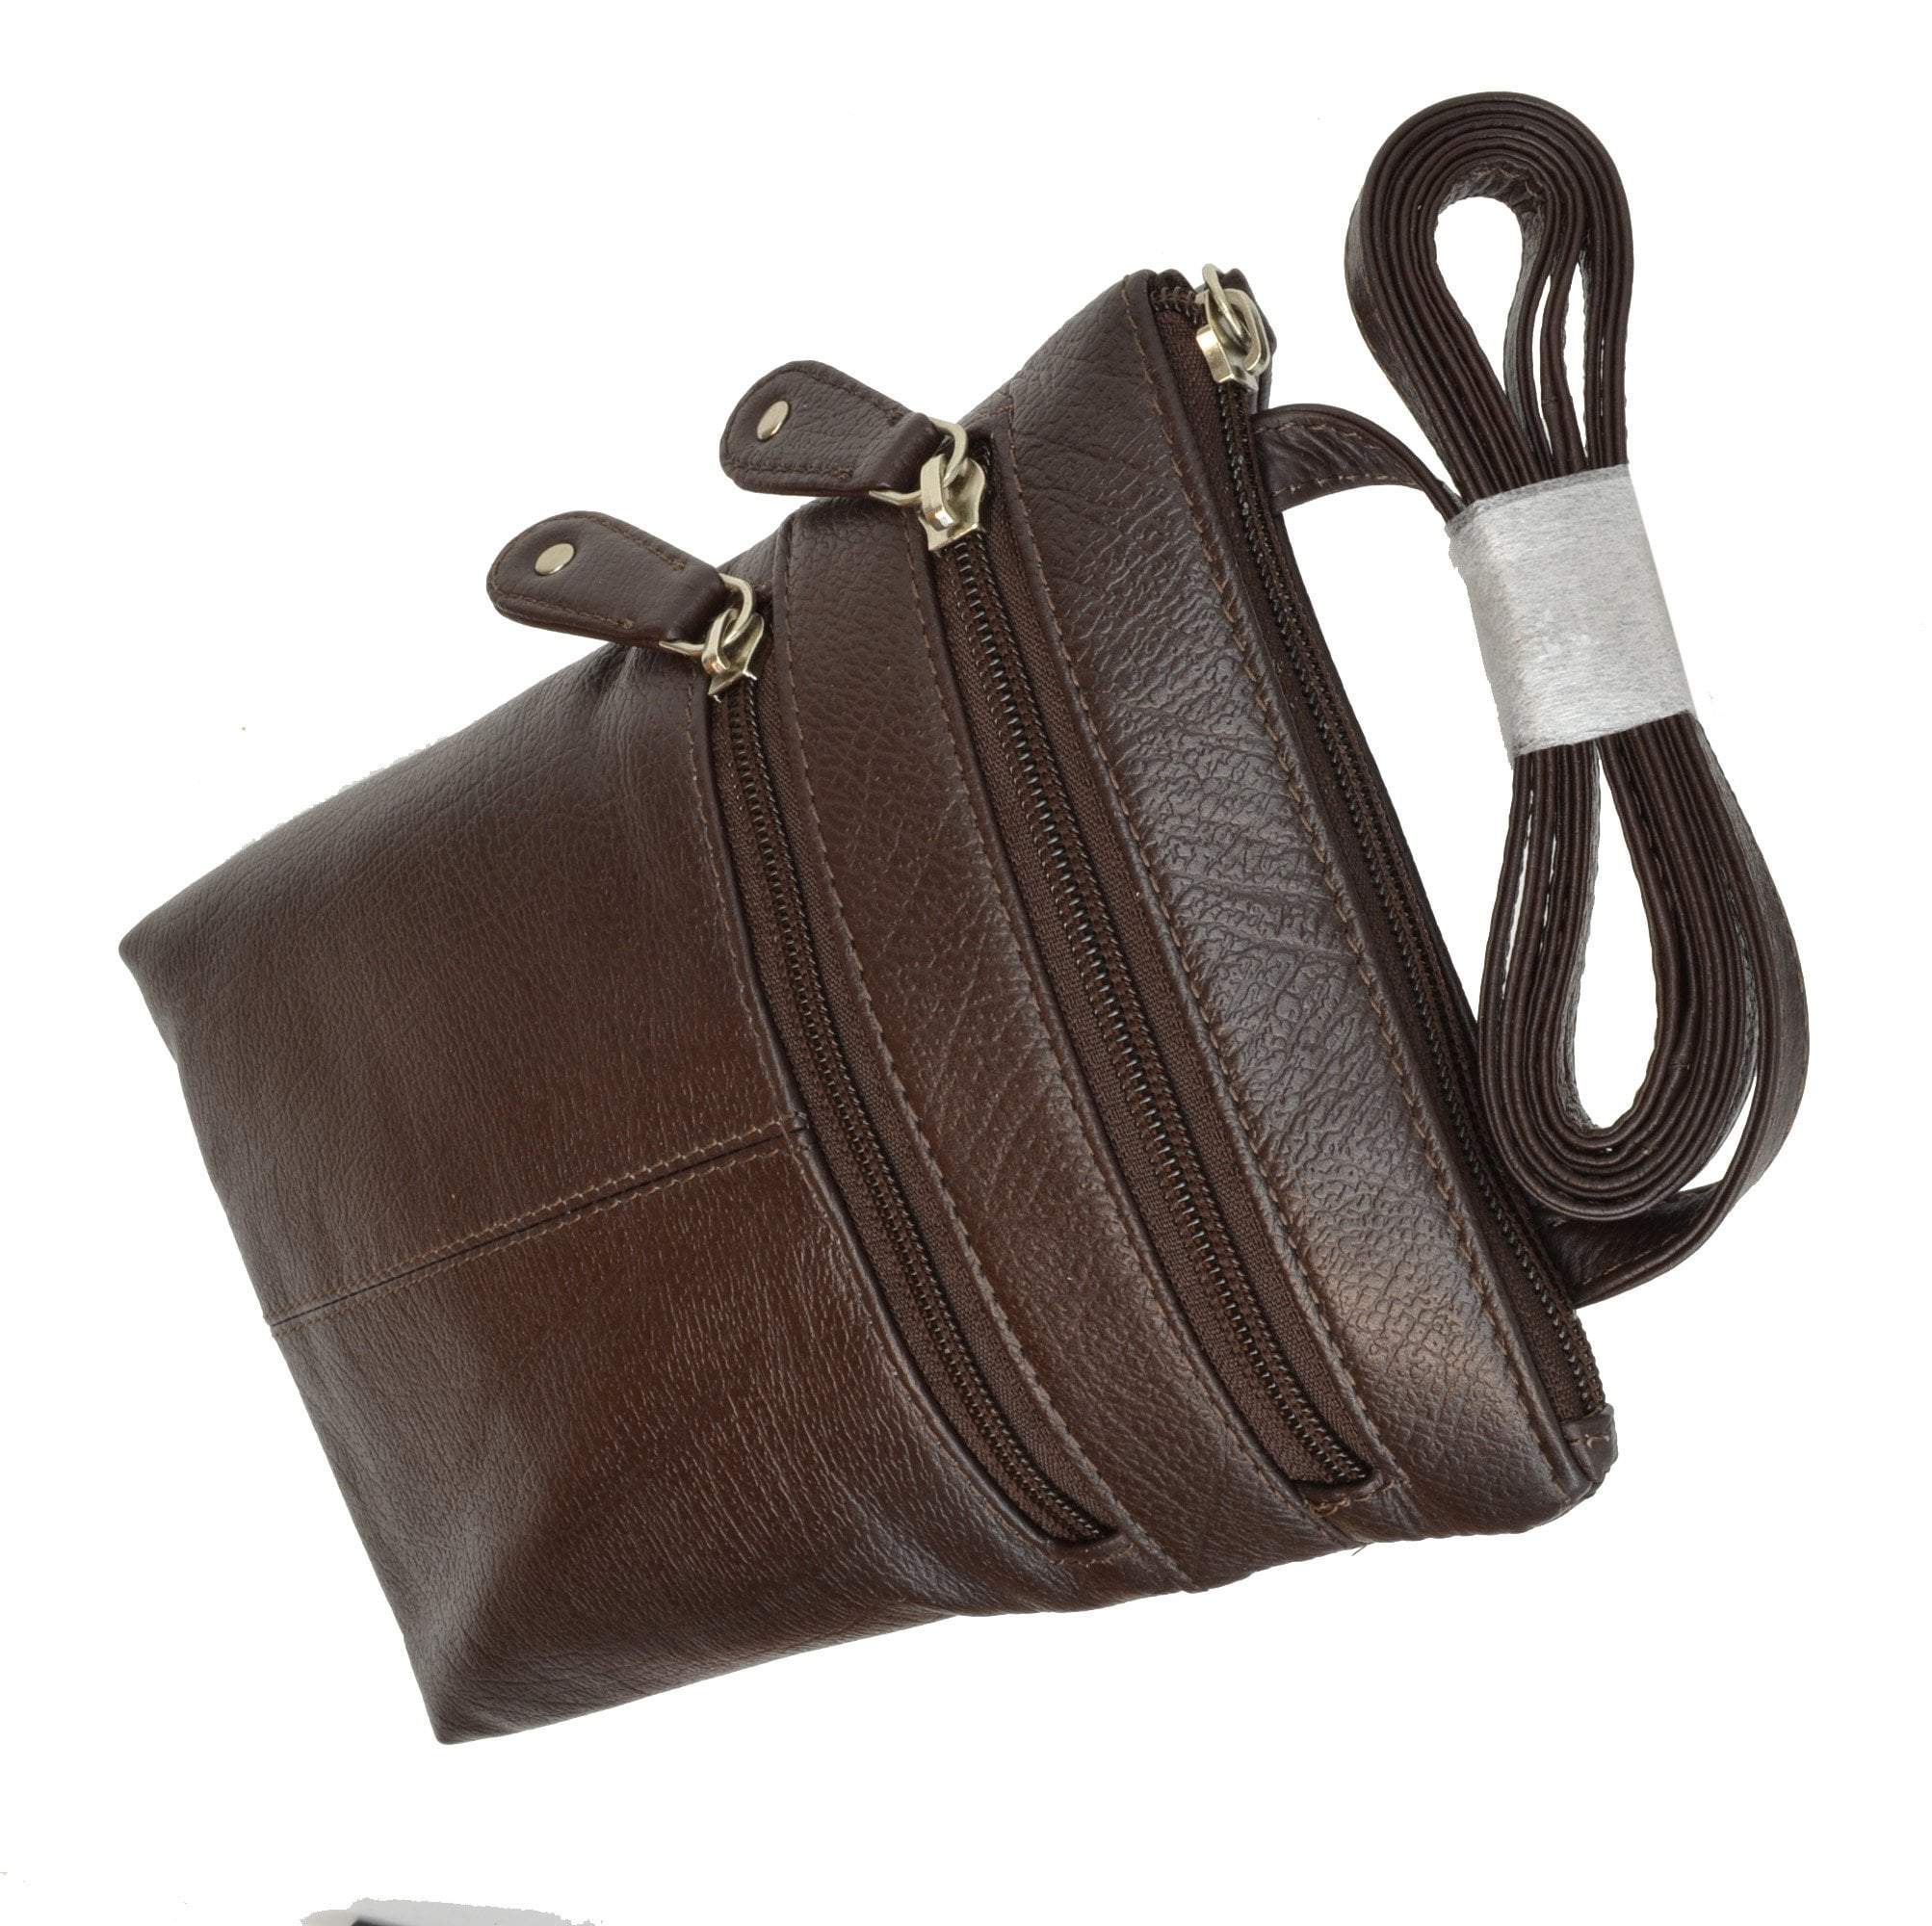 The Alpha | Men's Leather Crossbody Purse Bag – The Real Leather Company